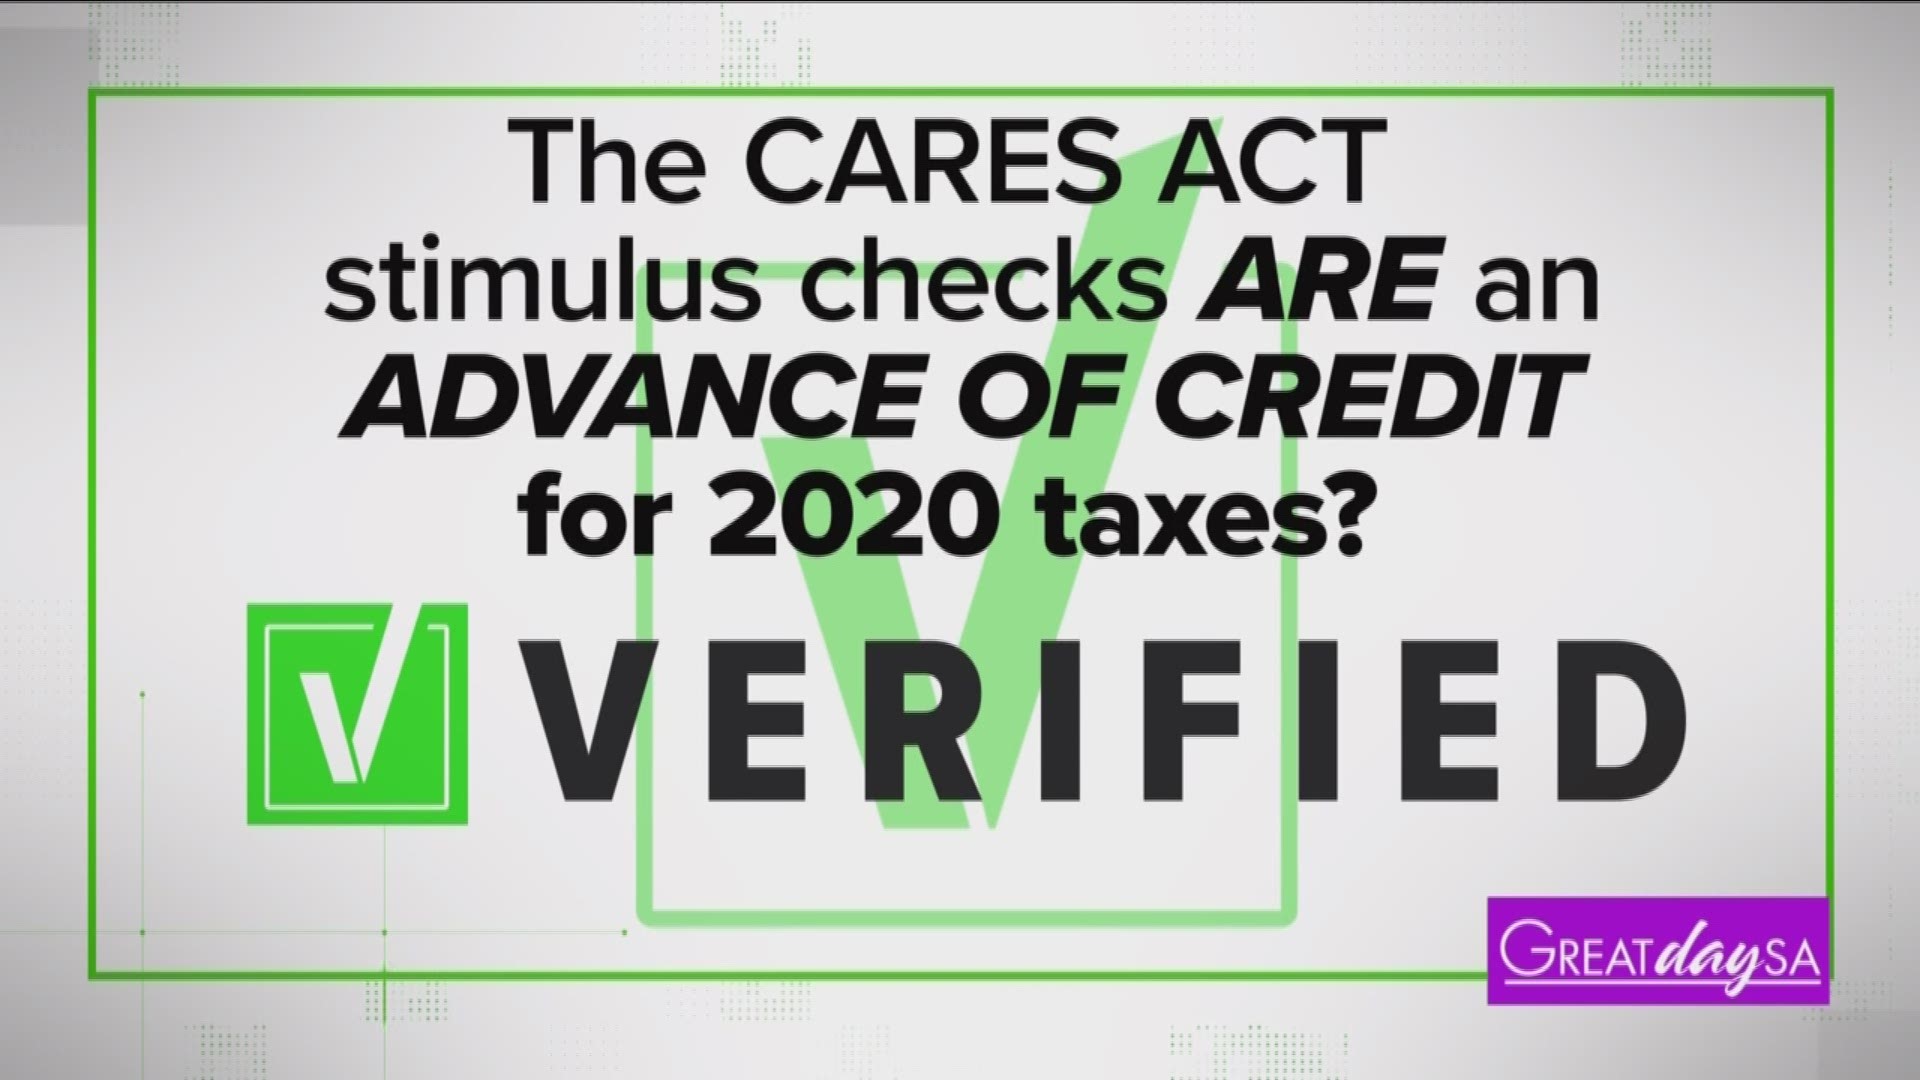 The verified information on your stimulus check